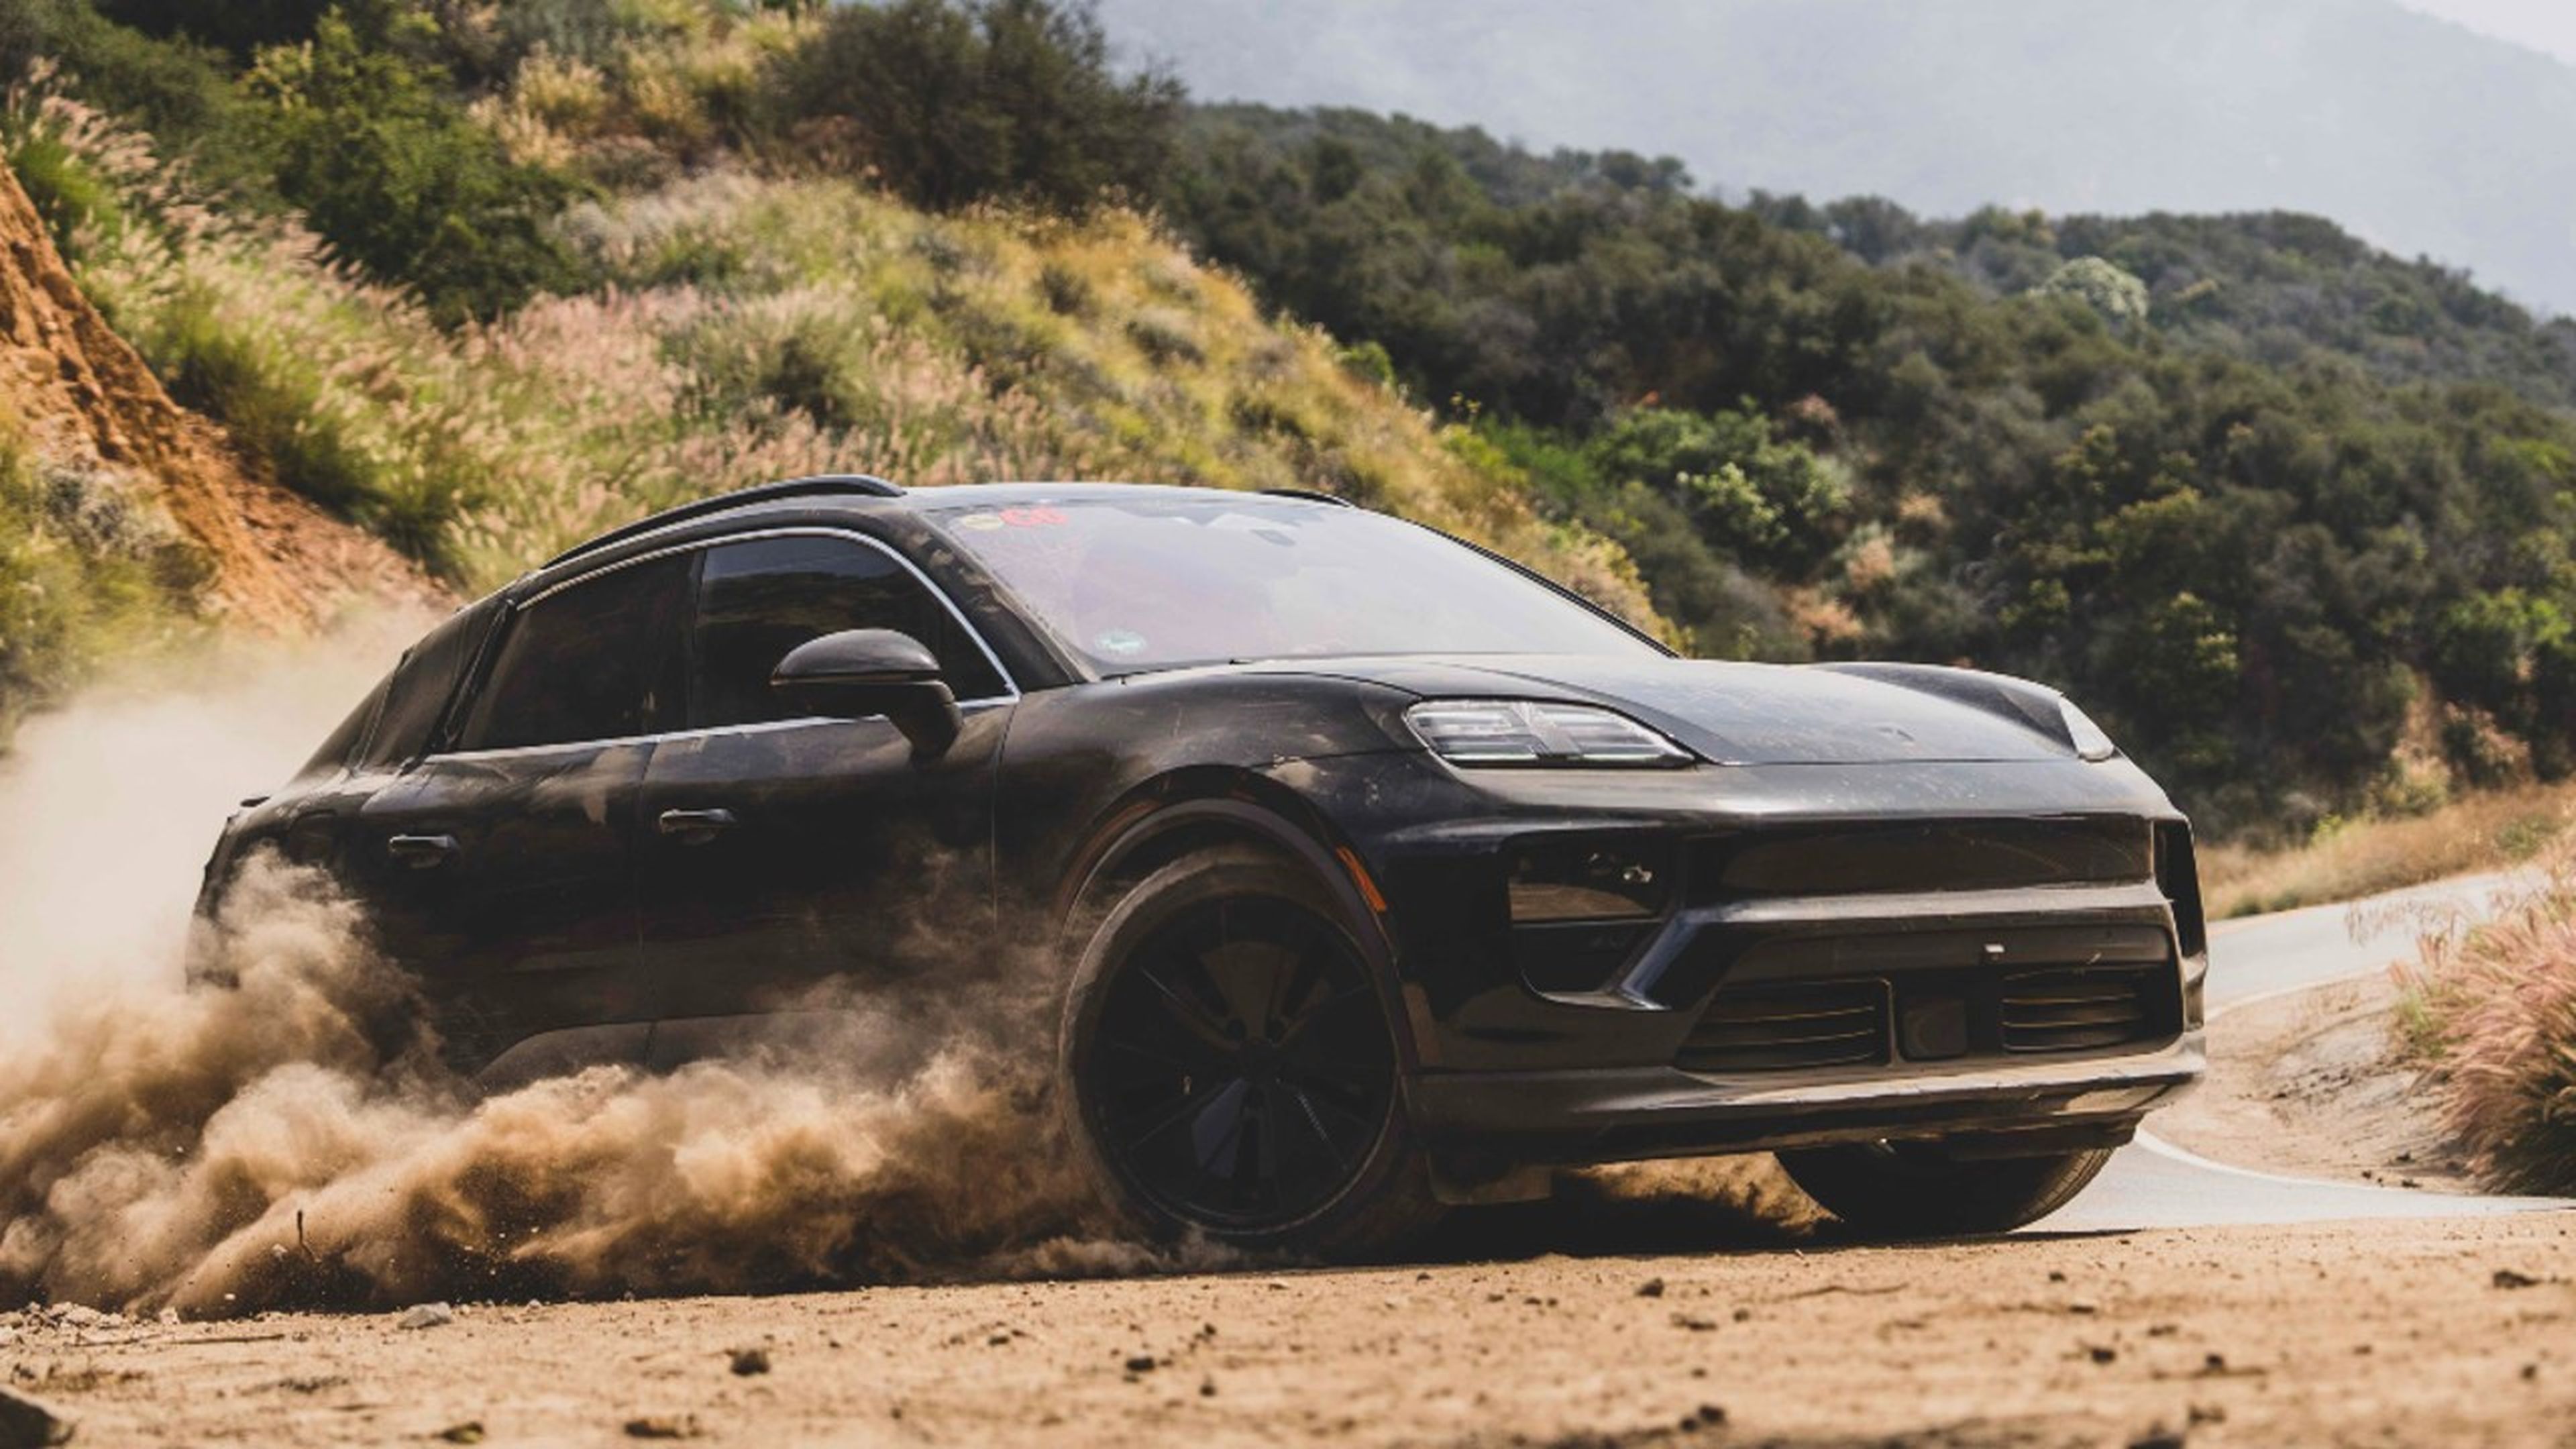 Porsche Macan (2022): full specs and details of latest SUV